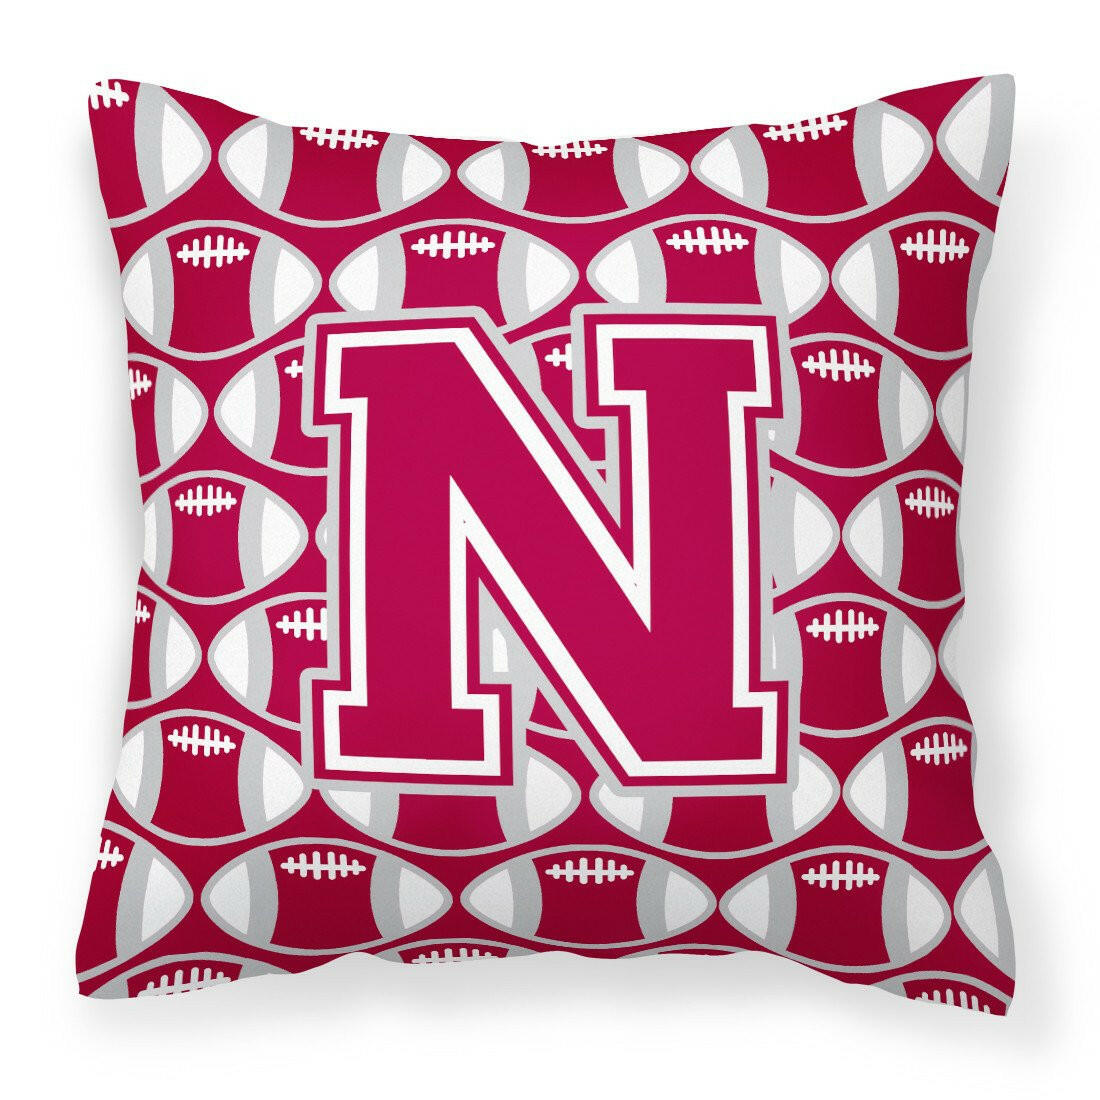 Letter N Football Crimson, grey and white Fabric Decorative Pillow CJ1065-NPW1414 by Caroline's Treasures